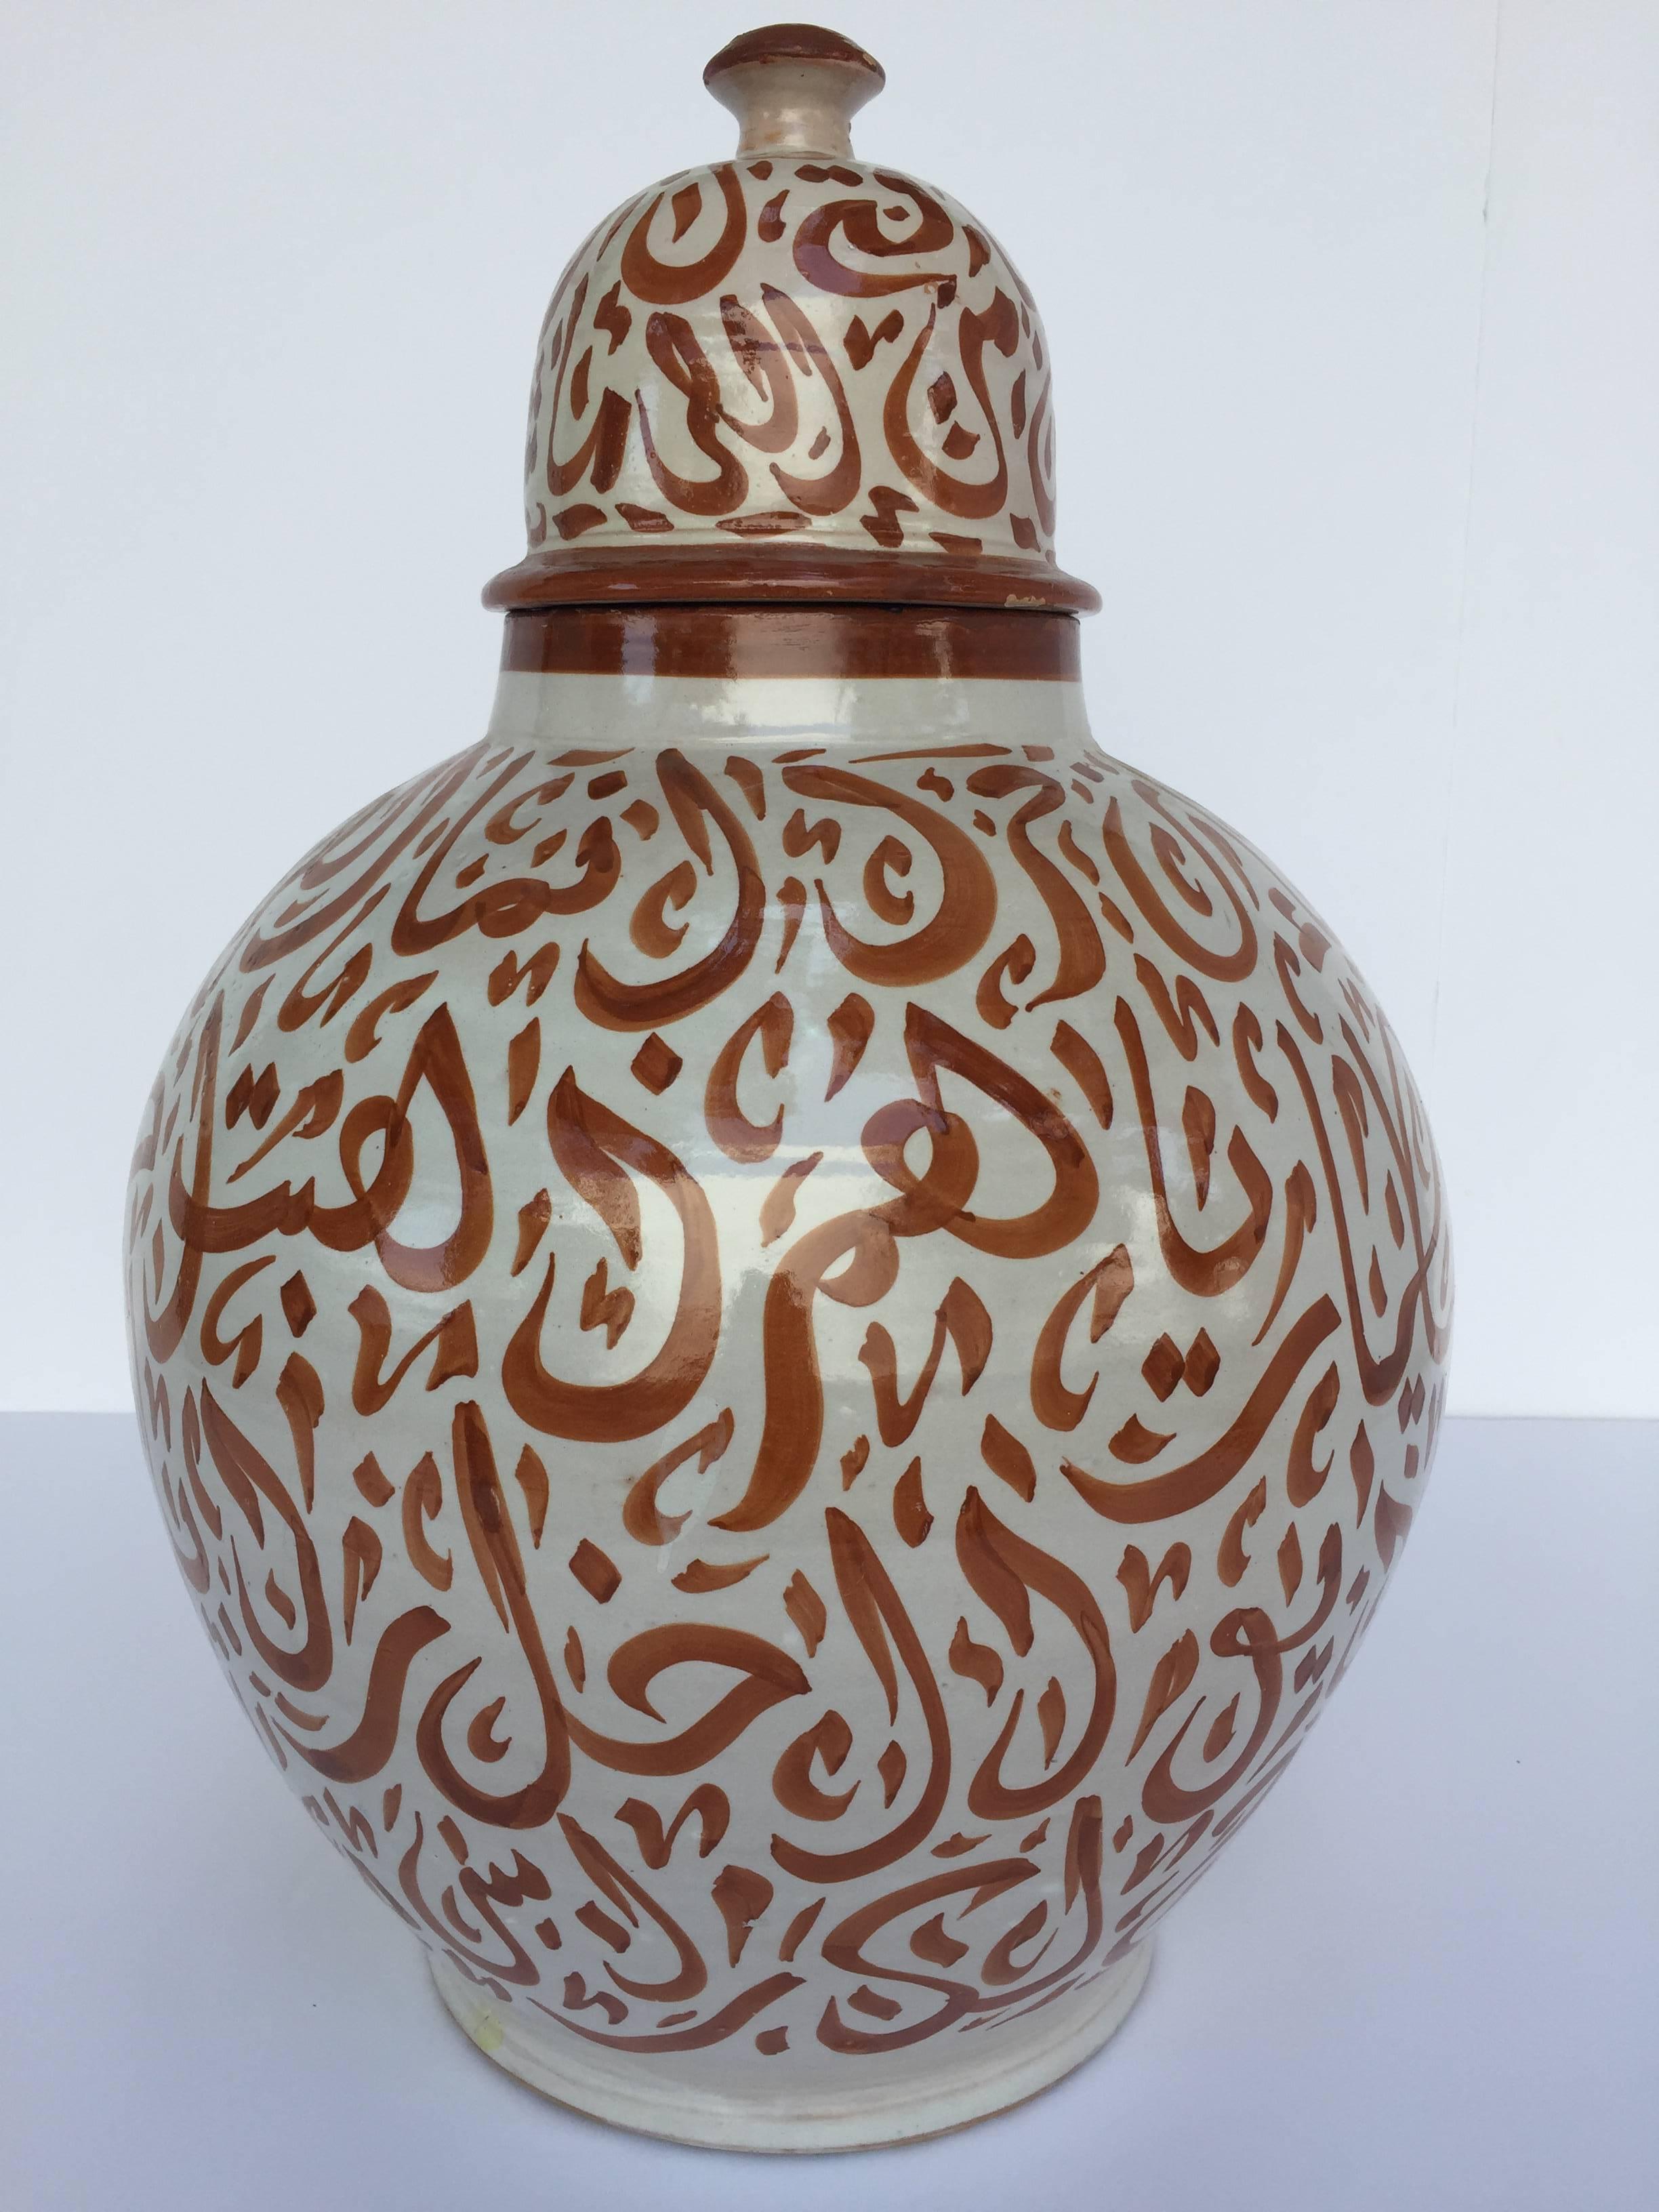 Large Moroccan glazed ceramic urn with lid from Fez. 
Moorish style ceramic handcrafted and hand-painted with Arabic calligraphy writing.
This kind of Art Writing looks calligraphic is called Lettrism, it is a form of art that uses letters that are